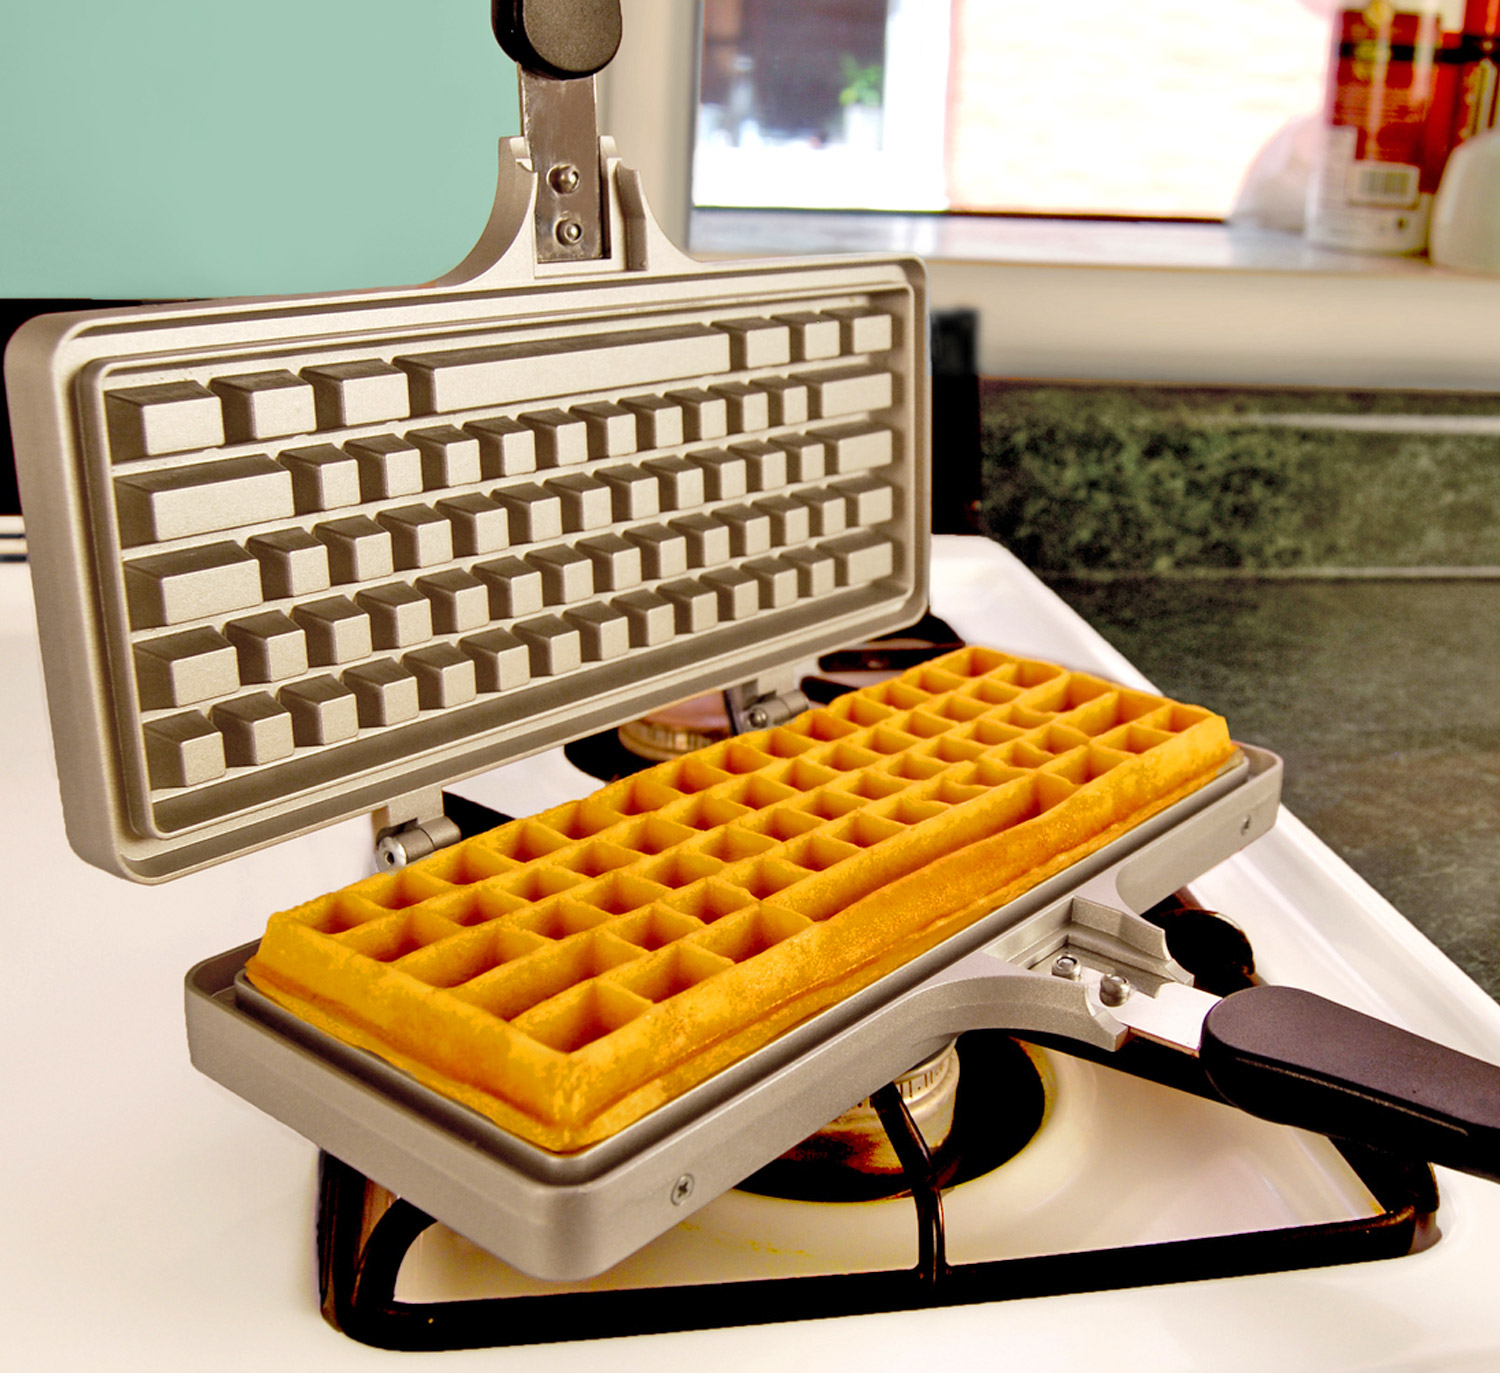 This Keyboard Shaped Waffle Iron Lets You Make Waffles In True Geeky